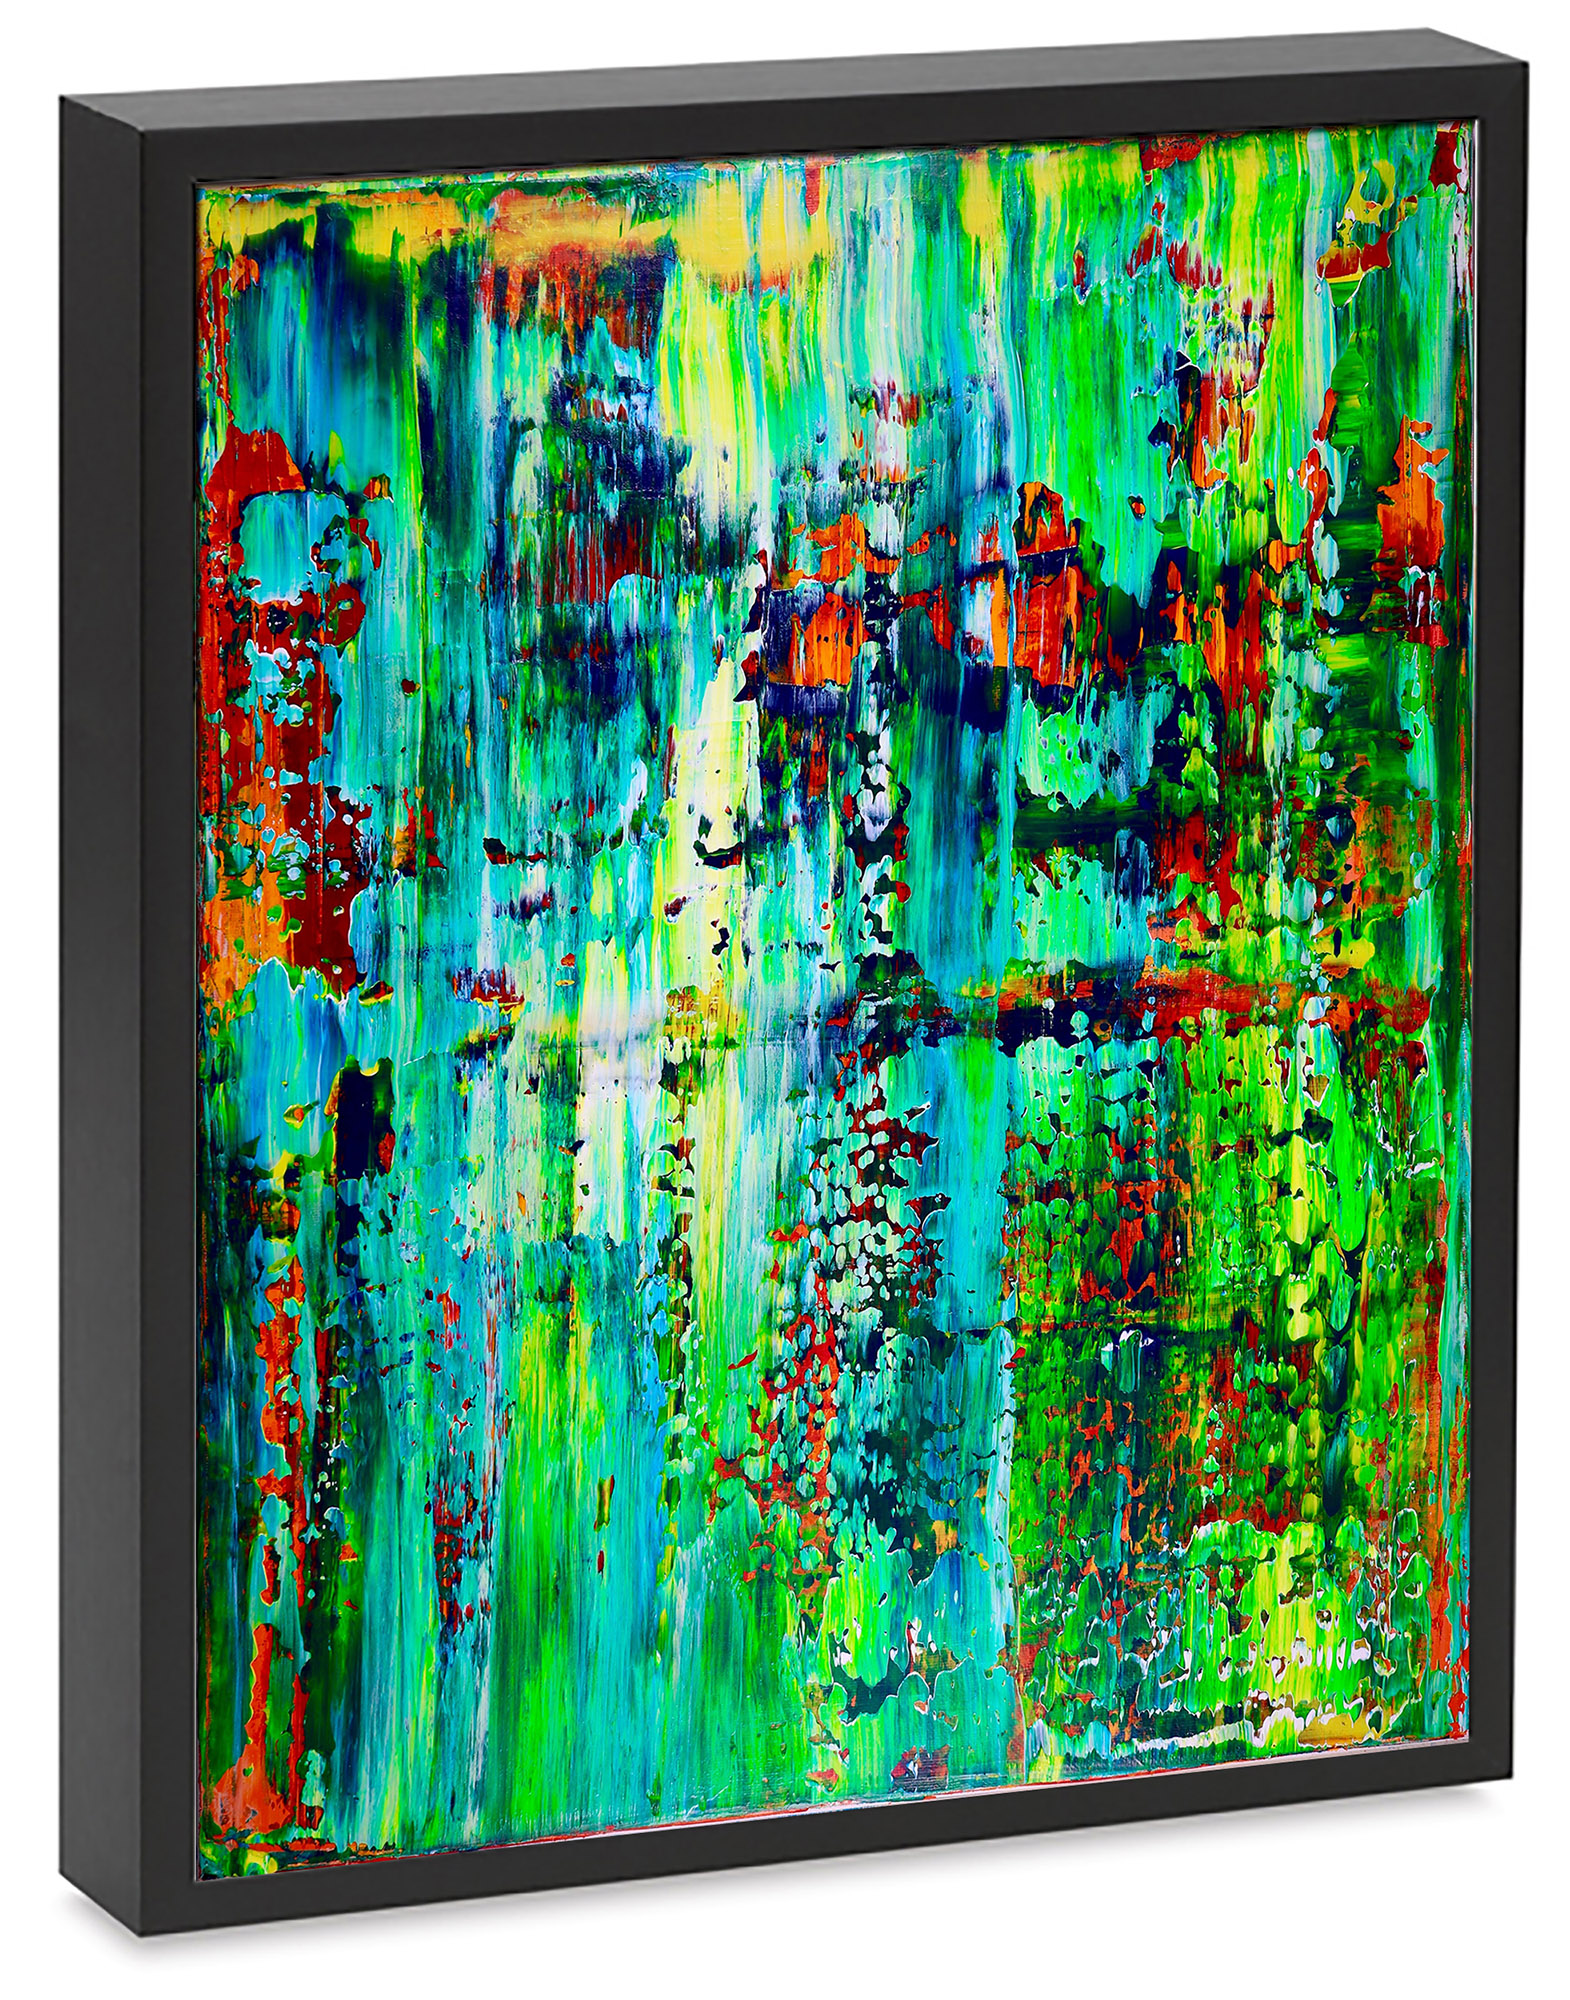 SOLD Artwork - Enchanted Spectra 2 by abstract painter Nestor Toro